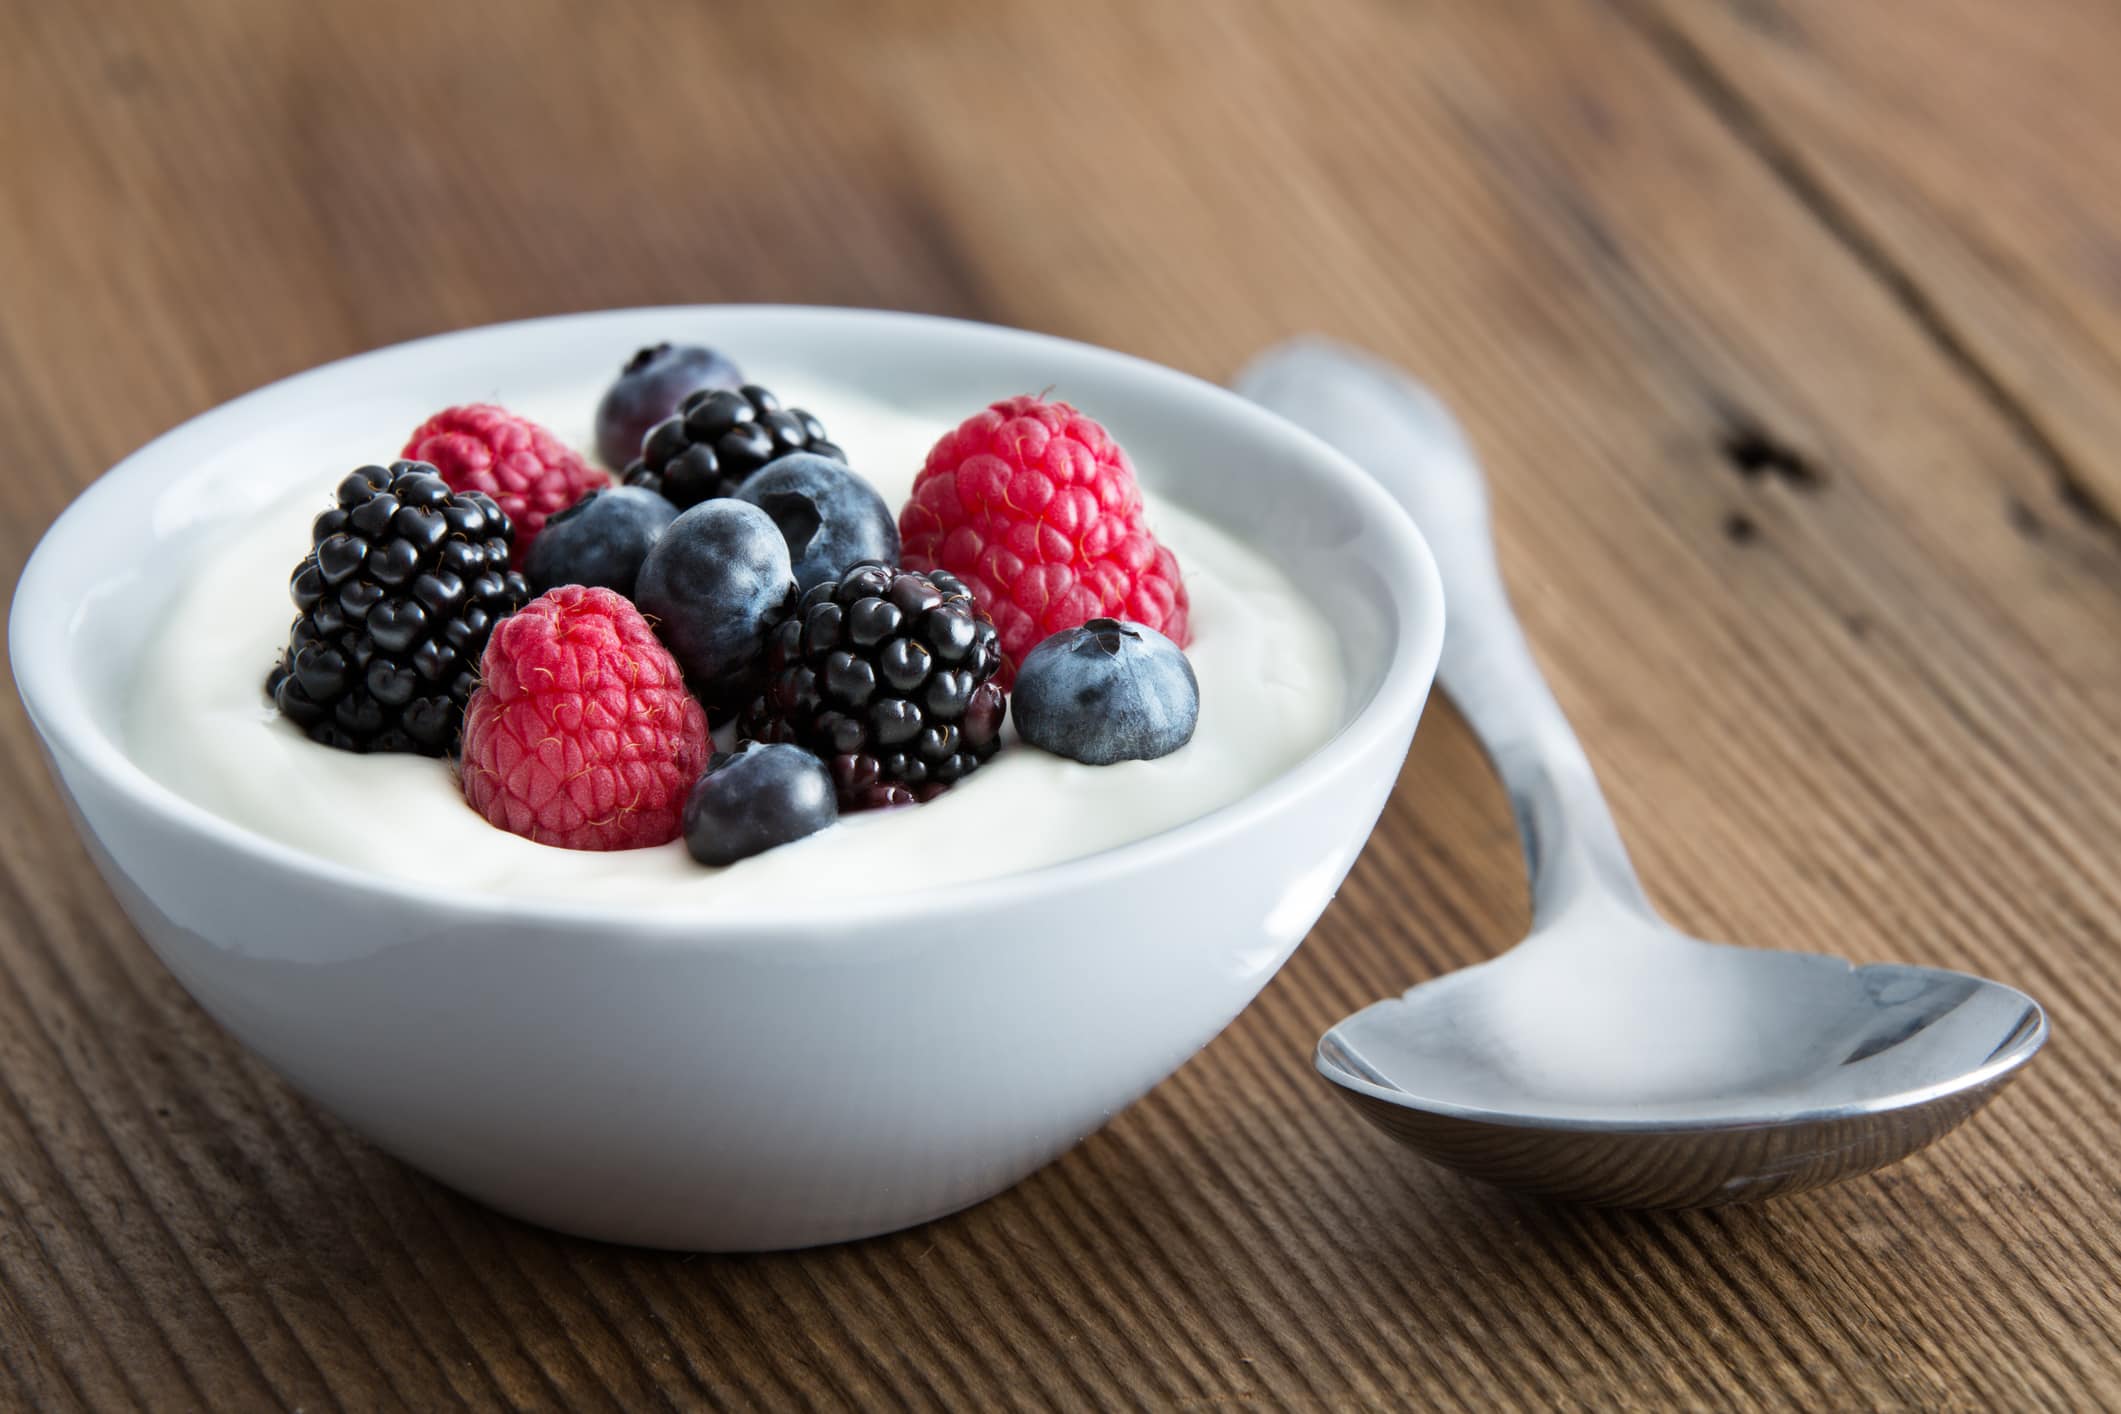 Bowl of fresh mixed berries and yogurt with farm fresh strawberries, blackberries and blueberries served on a wooden table